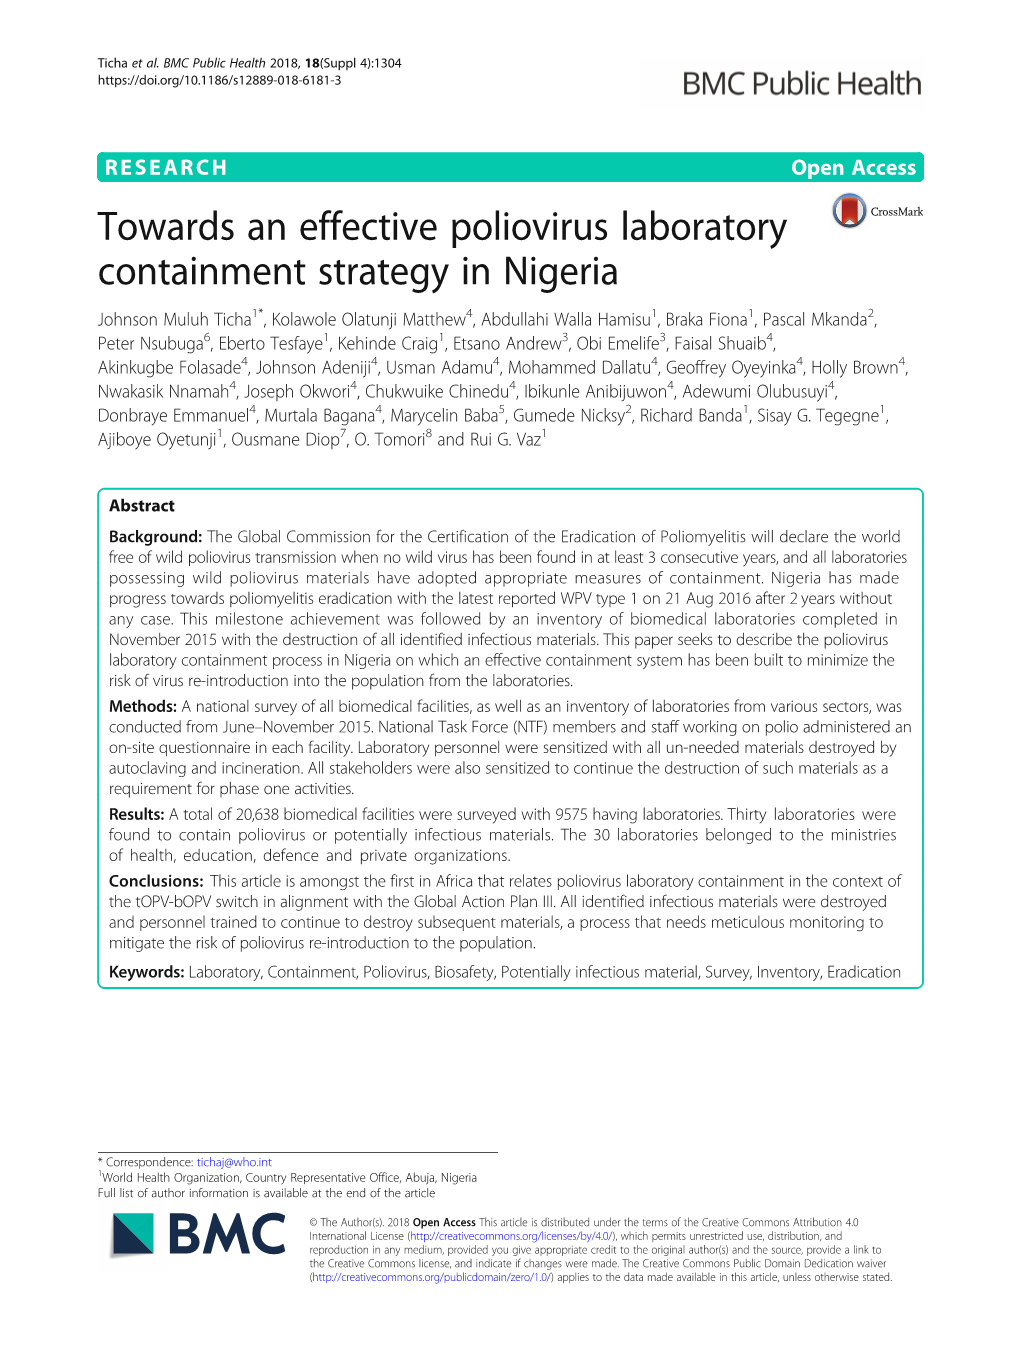 Towards an Effective Poliovirus Laboratory Containment Strategy In